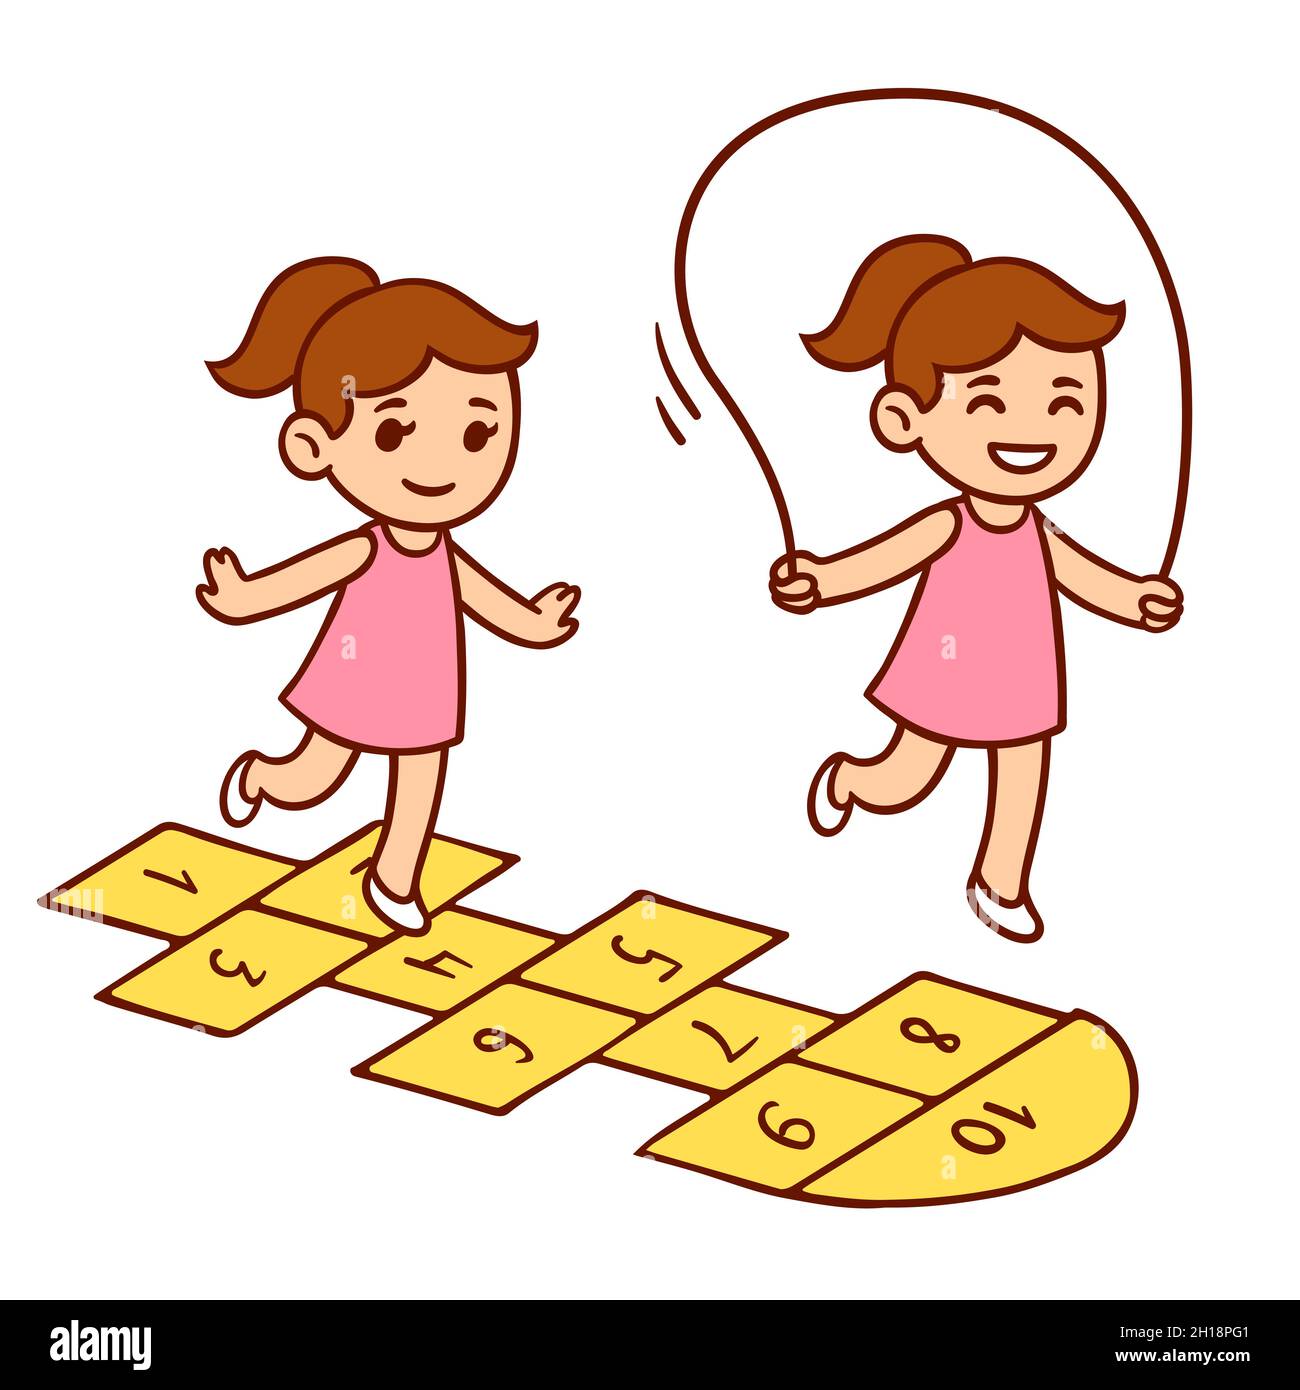 https://c8.alamy.com/comp/2H18PG1/cute-cartoon-little-girl-playing-hopscotch-and-jumping-rope-simple-happy-child-doodle-vector-clip-art-illustration-2H18PG1.jpg